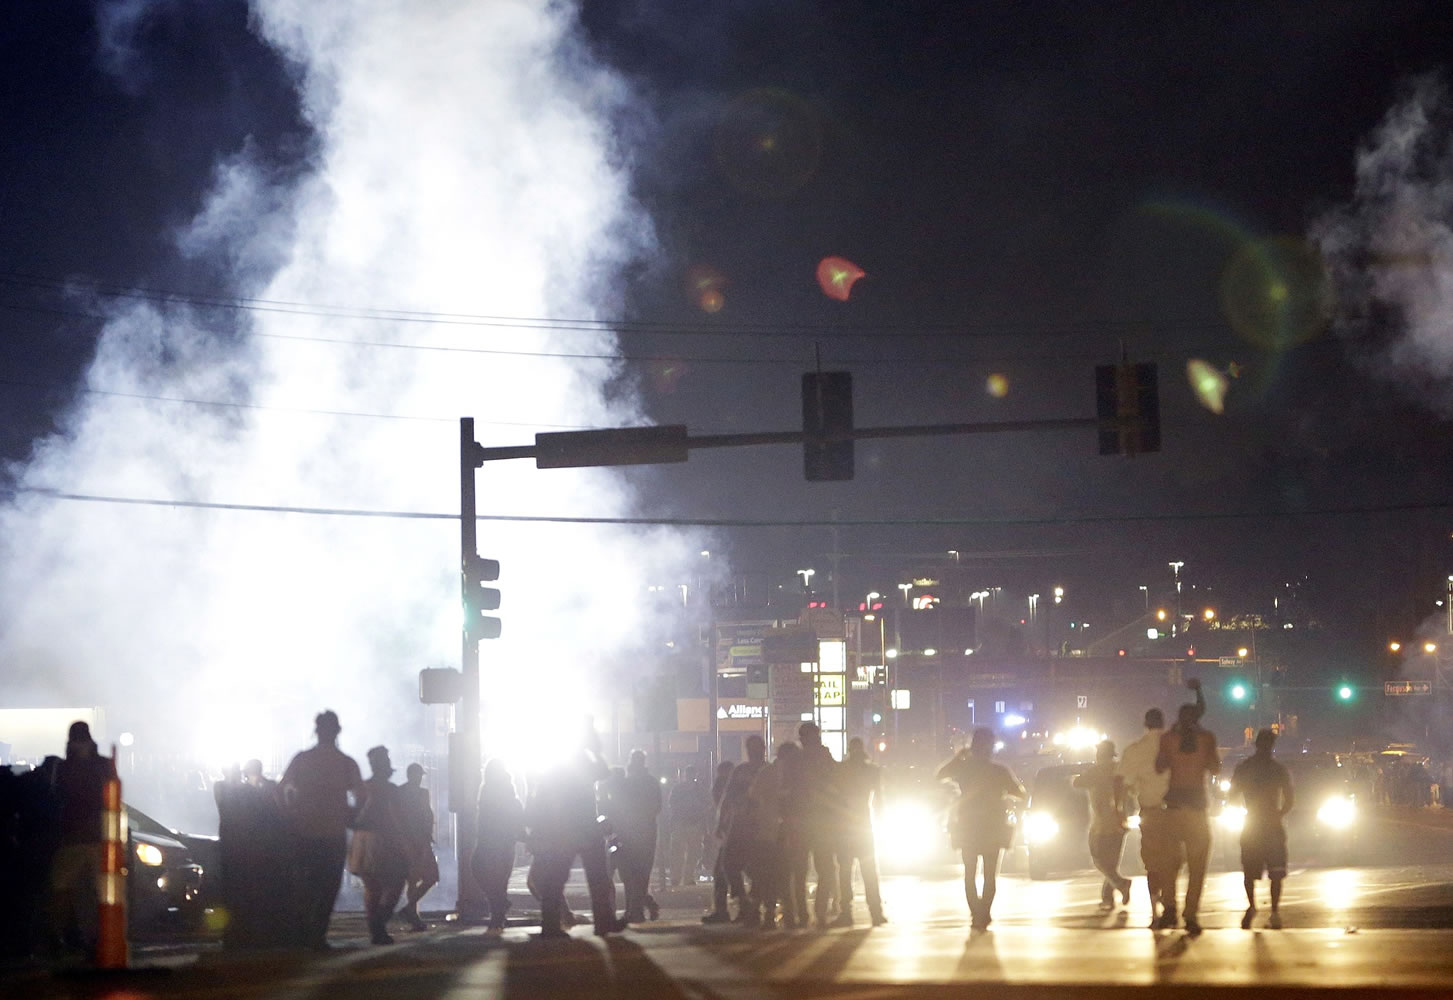 FILE - In this Monday, Aug. 18, 2014 file photo, people stand near a cloud of tear gas in Ferguson, Mo. during protests for the Aug. 9 shooting of unarmed black 18-year-old Michael Brown by a white police officer. The U.S. government agreed to a police request to shut down several miles of airspace surrounding Ferguson, even though authorities said their purpose was to keep media helicopters away during protests in August, according to recordings of air traffic control conversations obtained by The Associated Press.